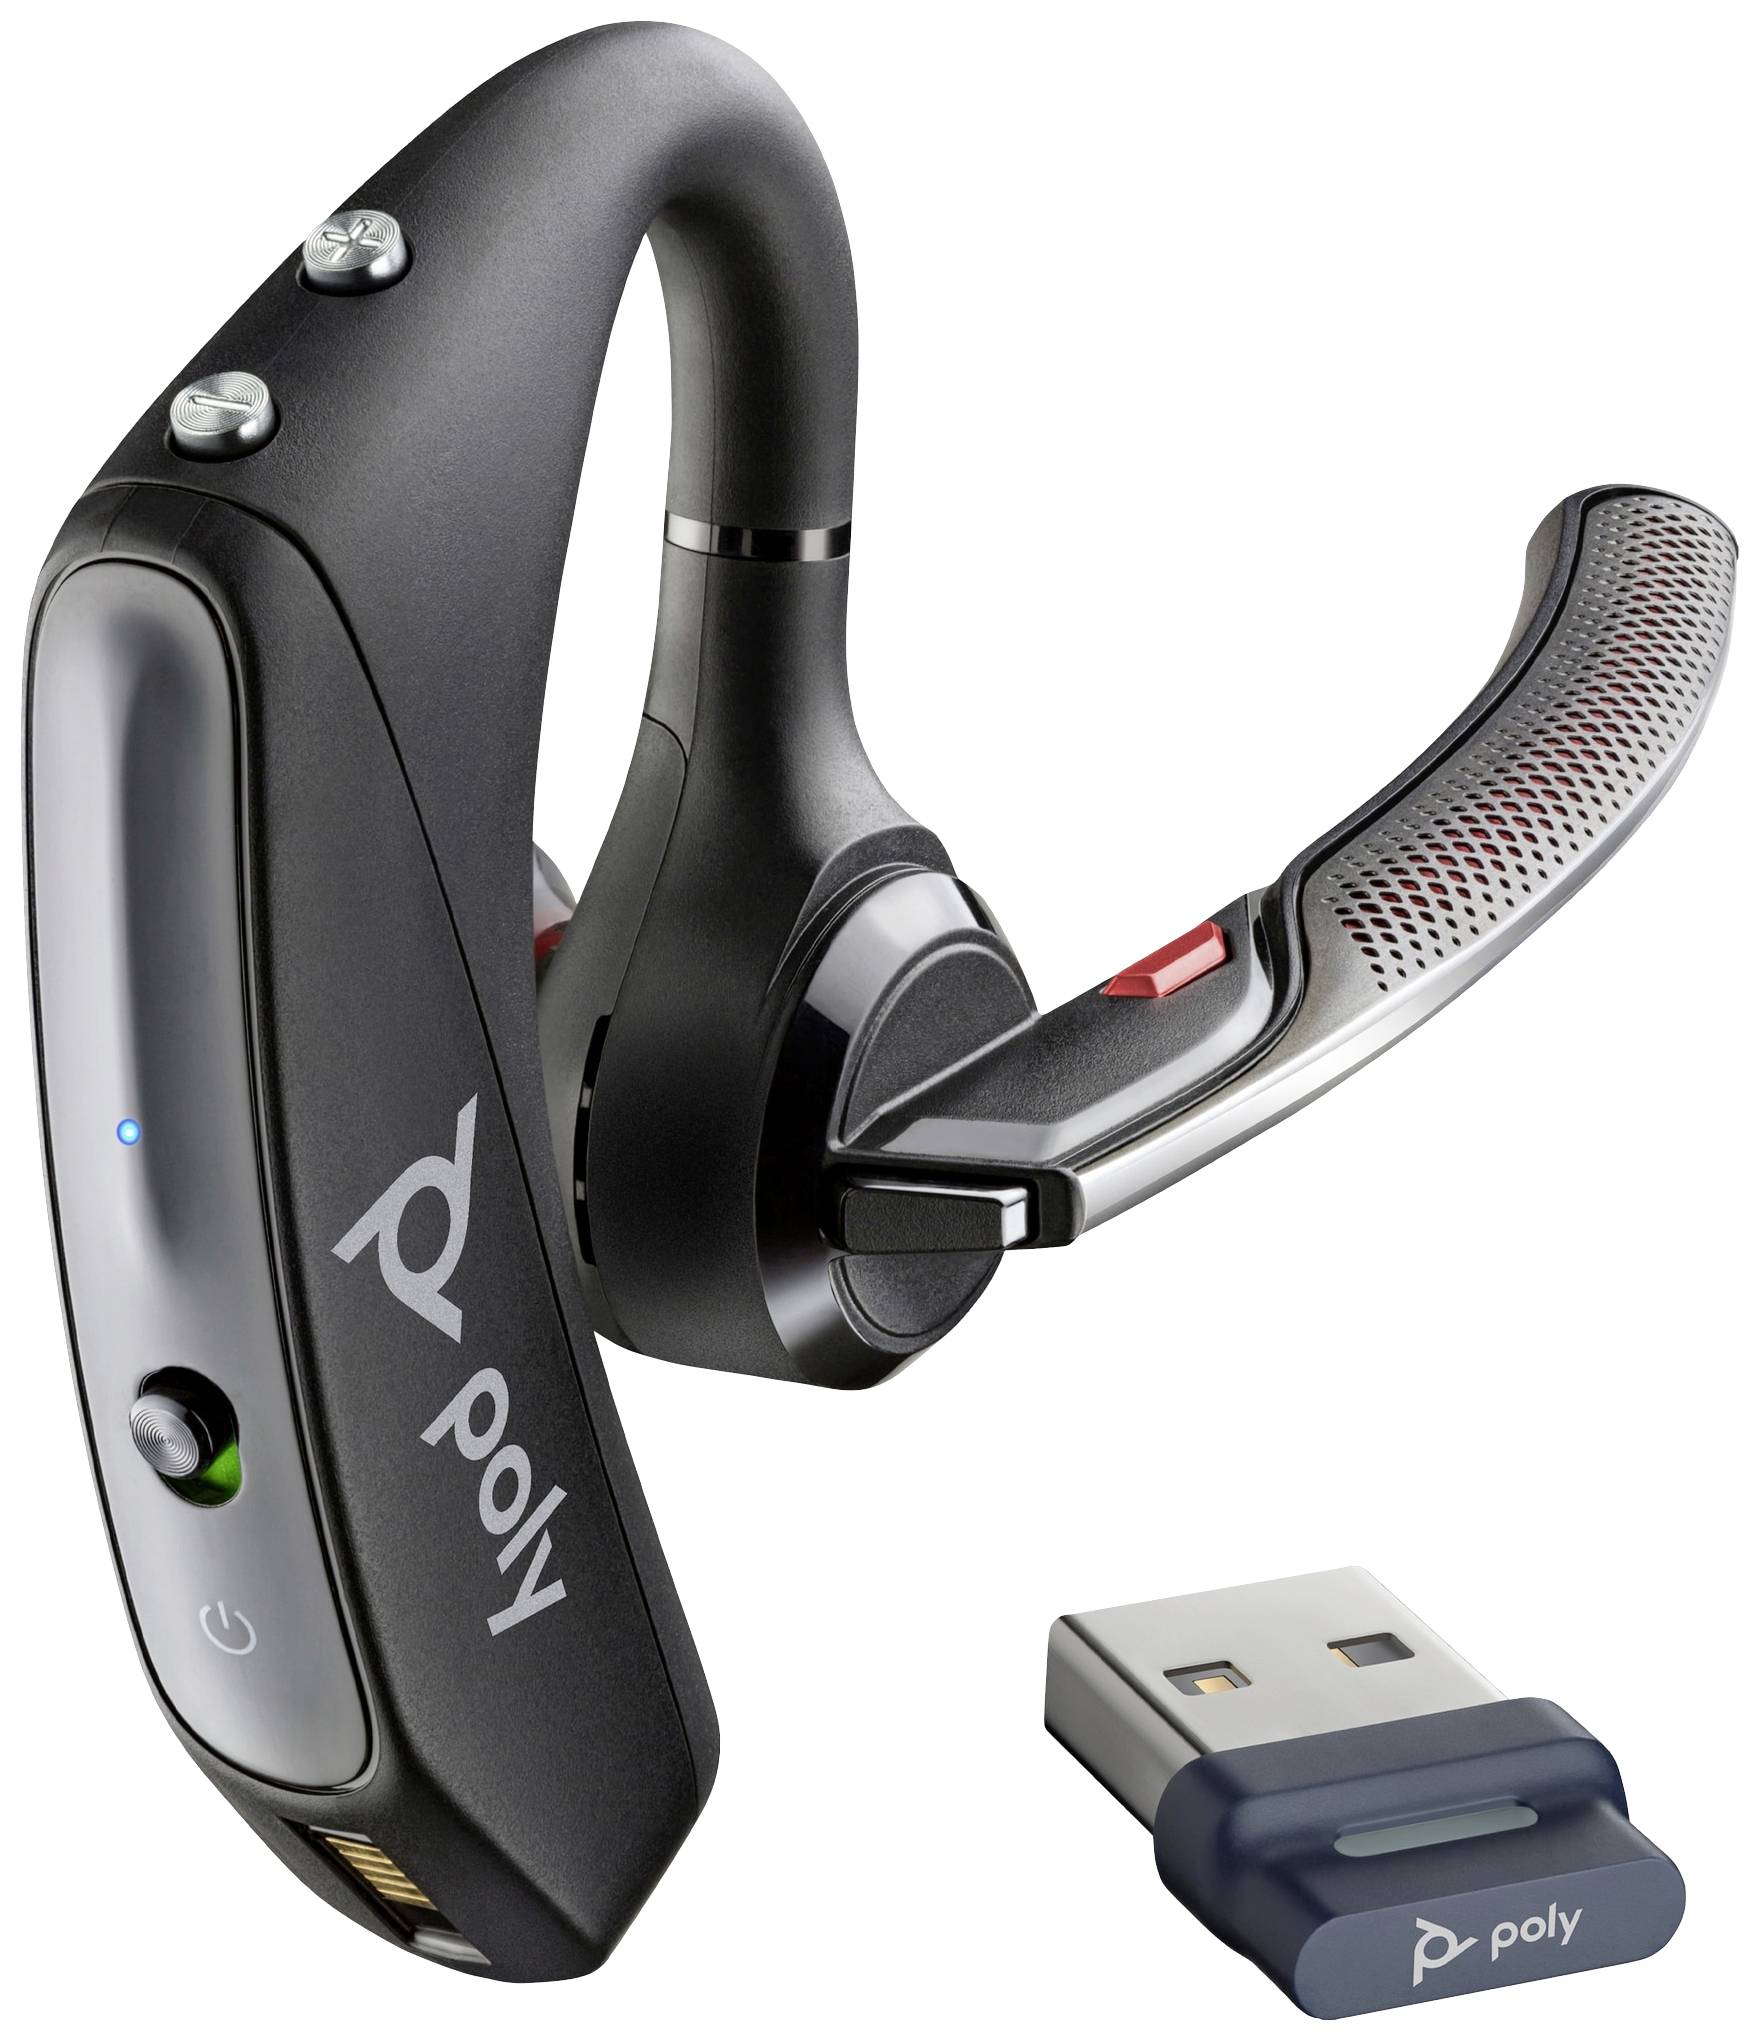 HP Poly Voyager 5200 USB-A Bluetooth Headset +BT700 Dongle